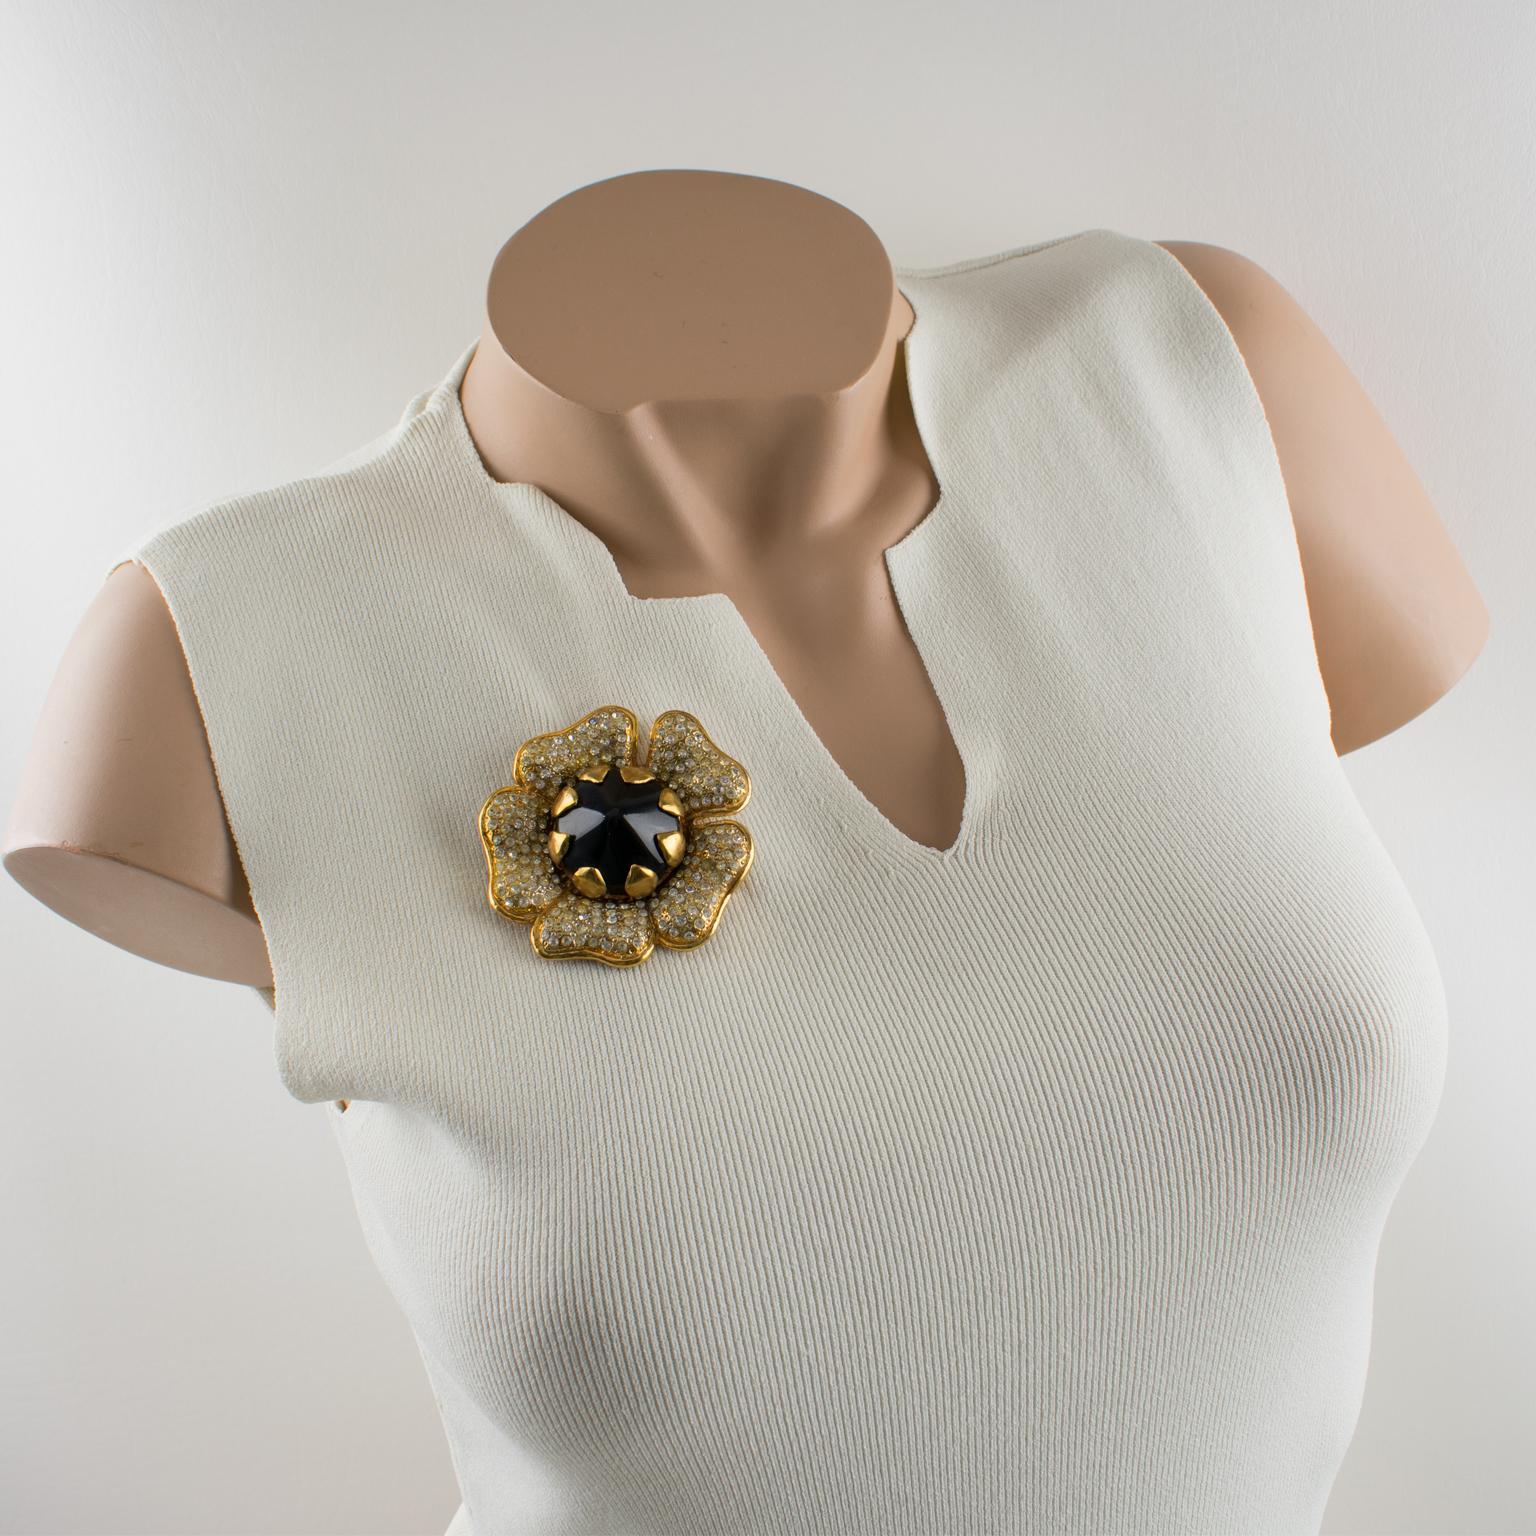 Lovely Valentino Garavani couture pin brooch. Huge dimensional gilt metal flower shape all paved with tiny crystal clear rhinestones and topped with black resin cabochon heart. Security closing clasp. Valentino hallmark underside.
Measurements: 2.75